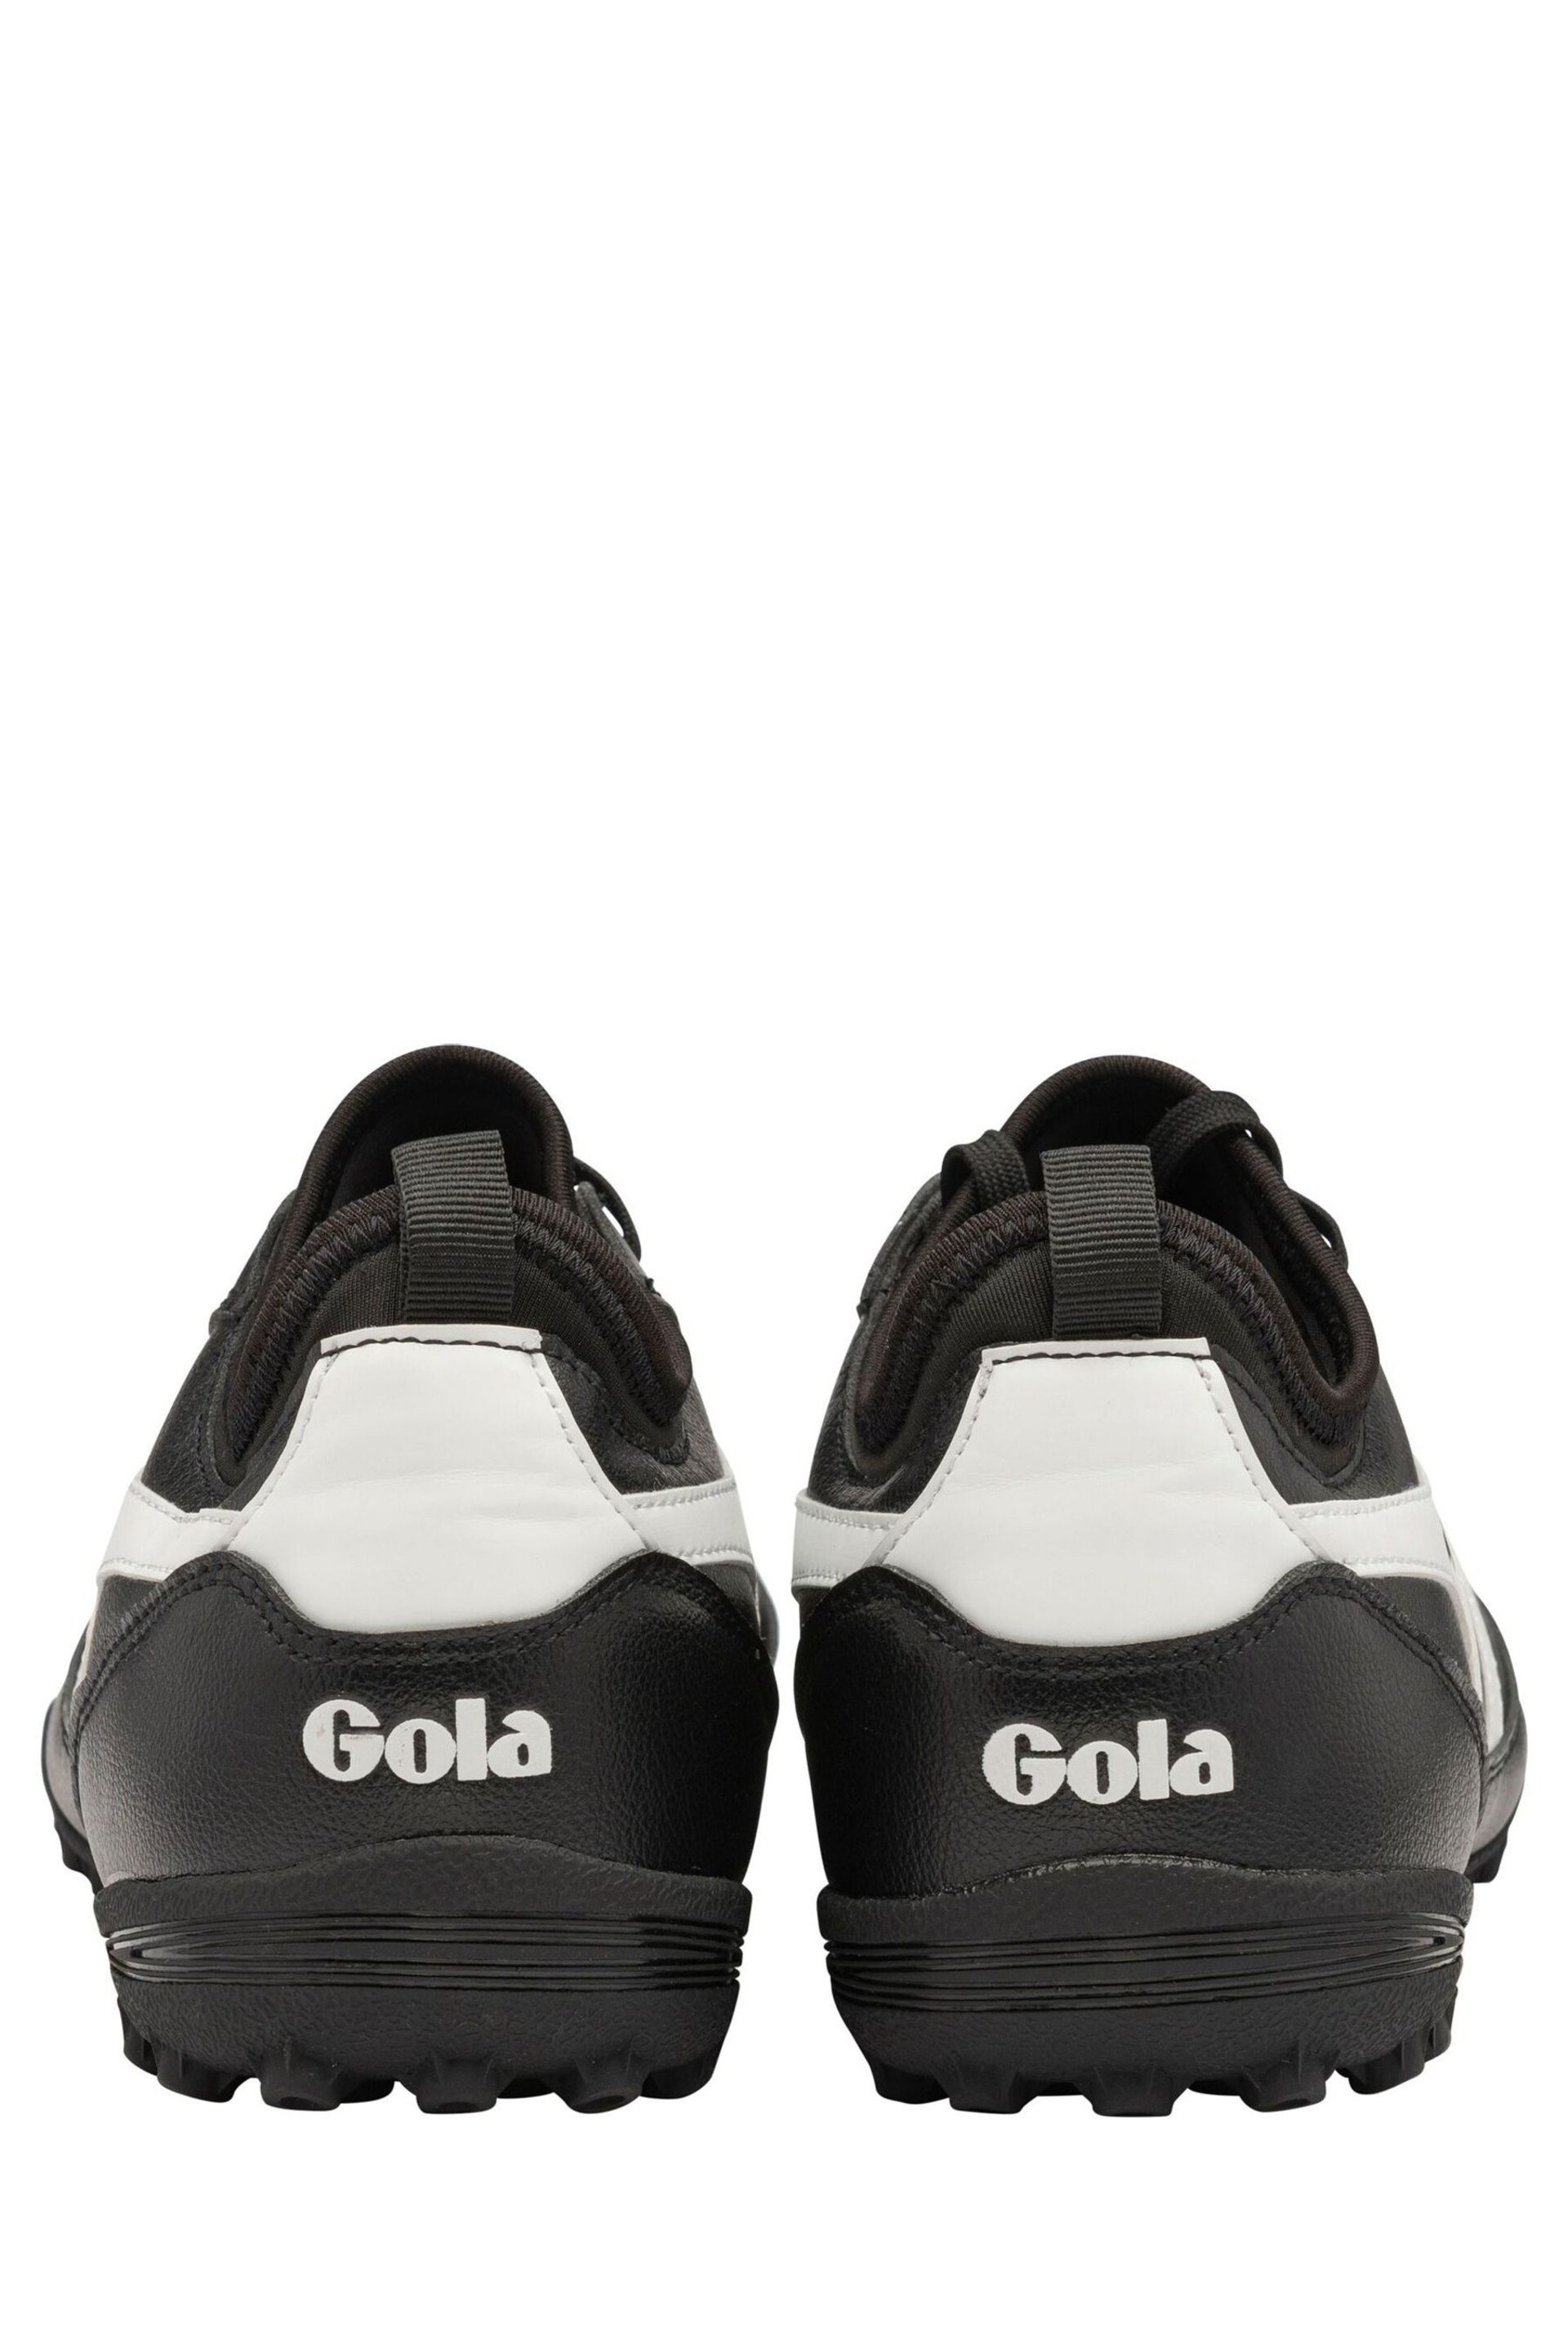 Gola Black/White Mens Ceptor Turf Microfibre Lace-Up Football Boots - Image 2 of 5